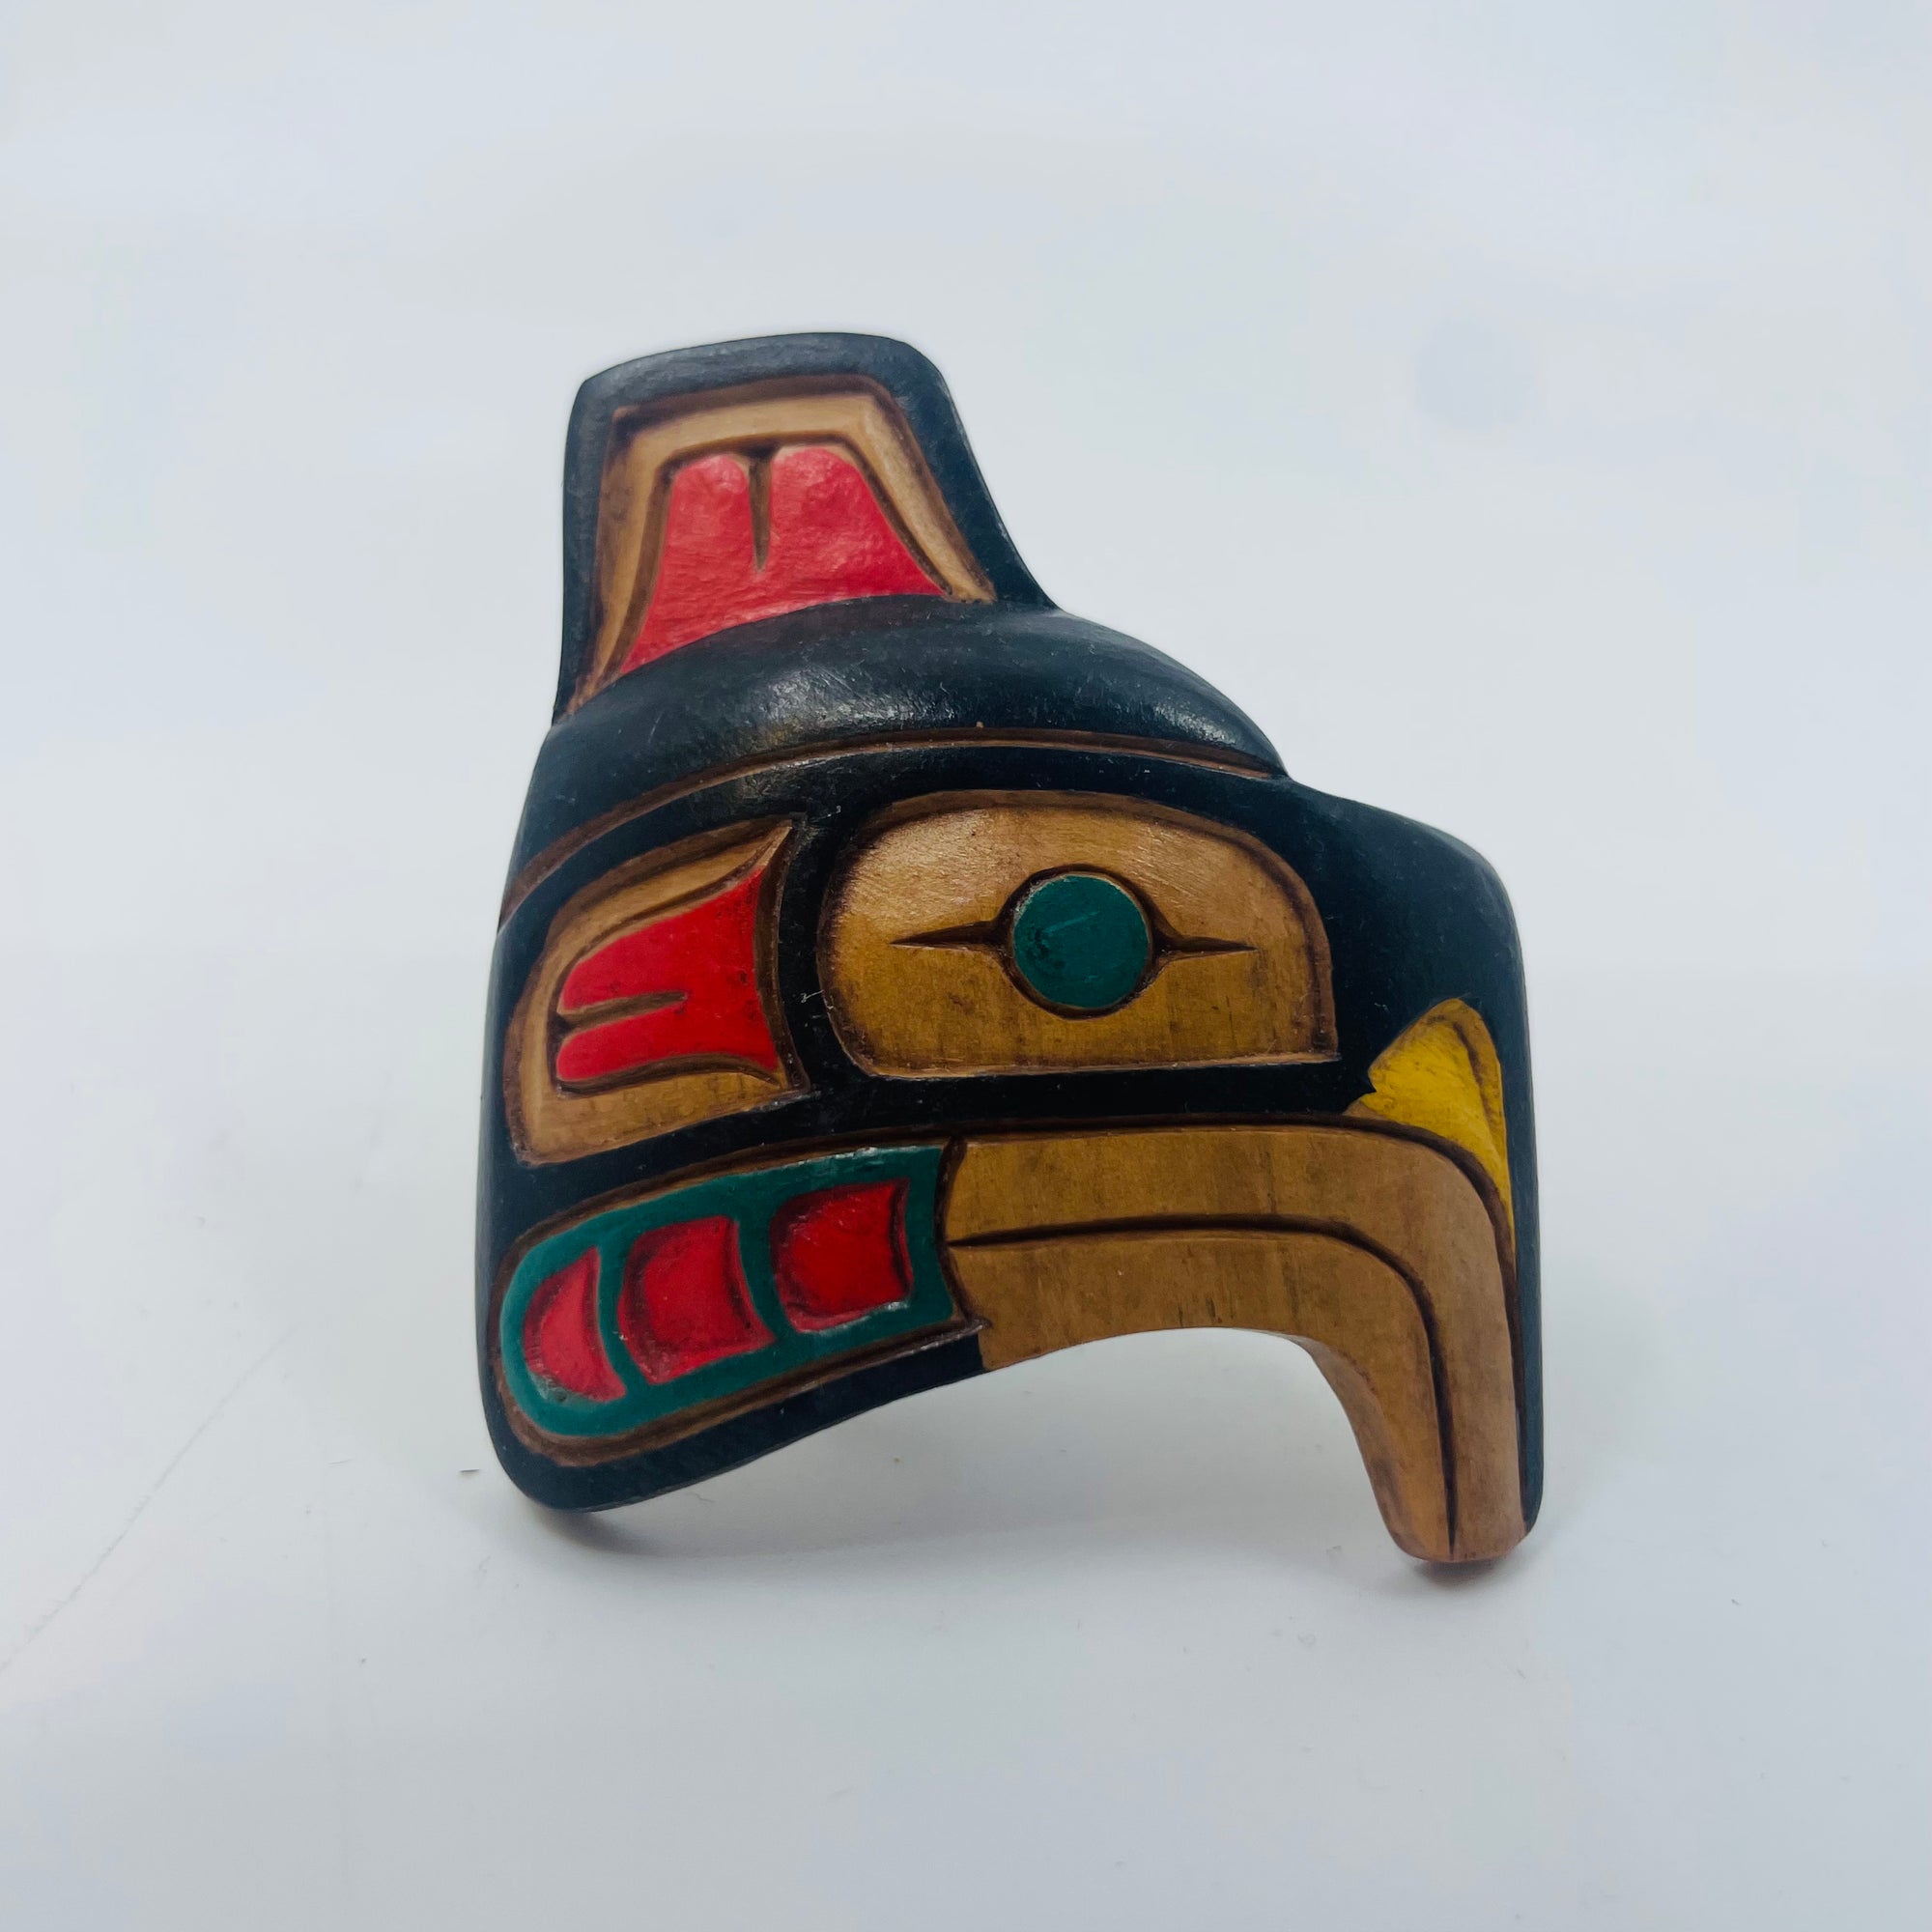 Artie George Magnets - Eagle v4 - WM-Magnets-31 - House of Himwitsa Native Art Gallery and Gifts